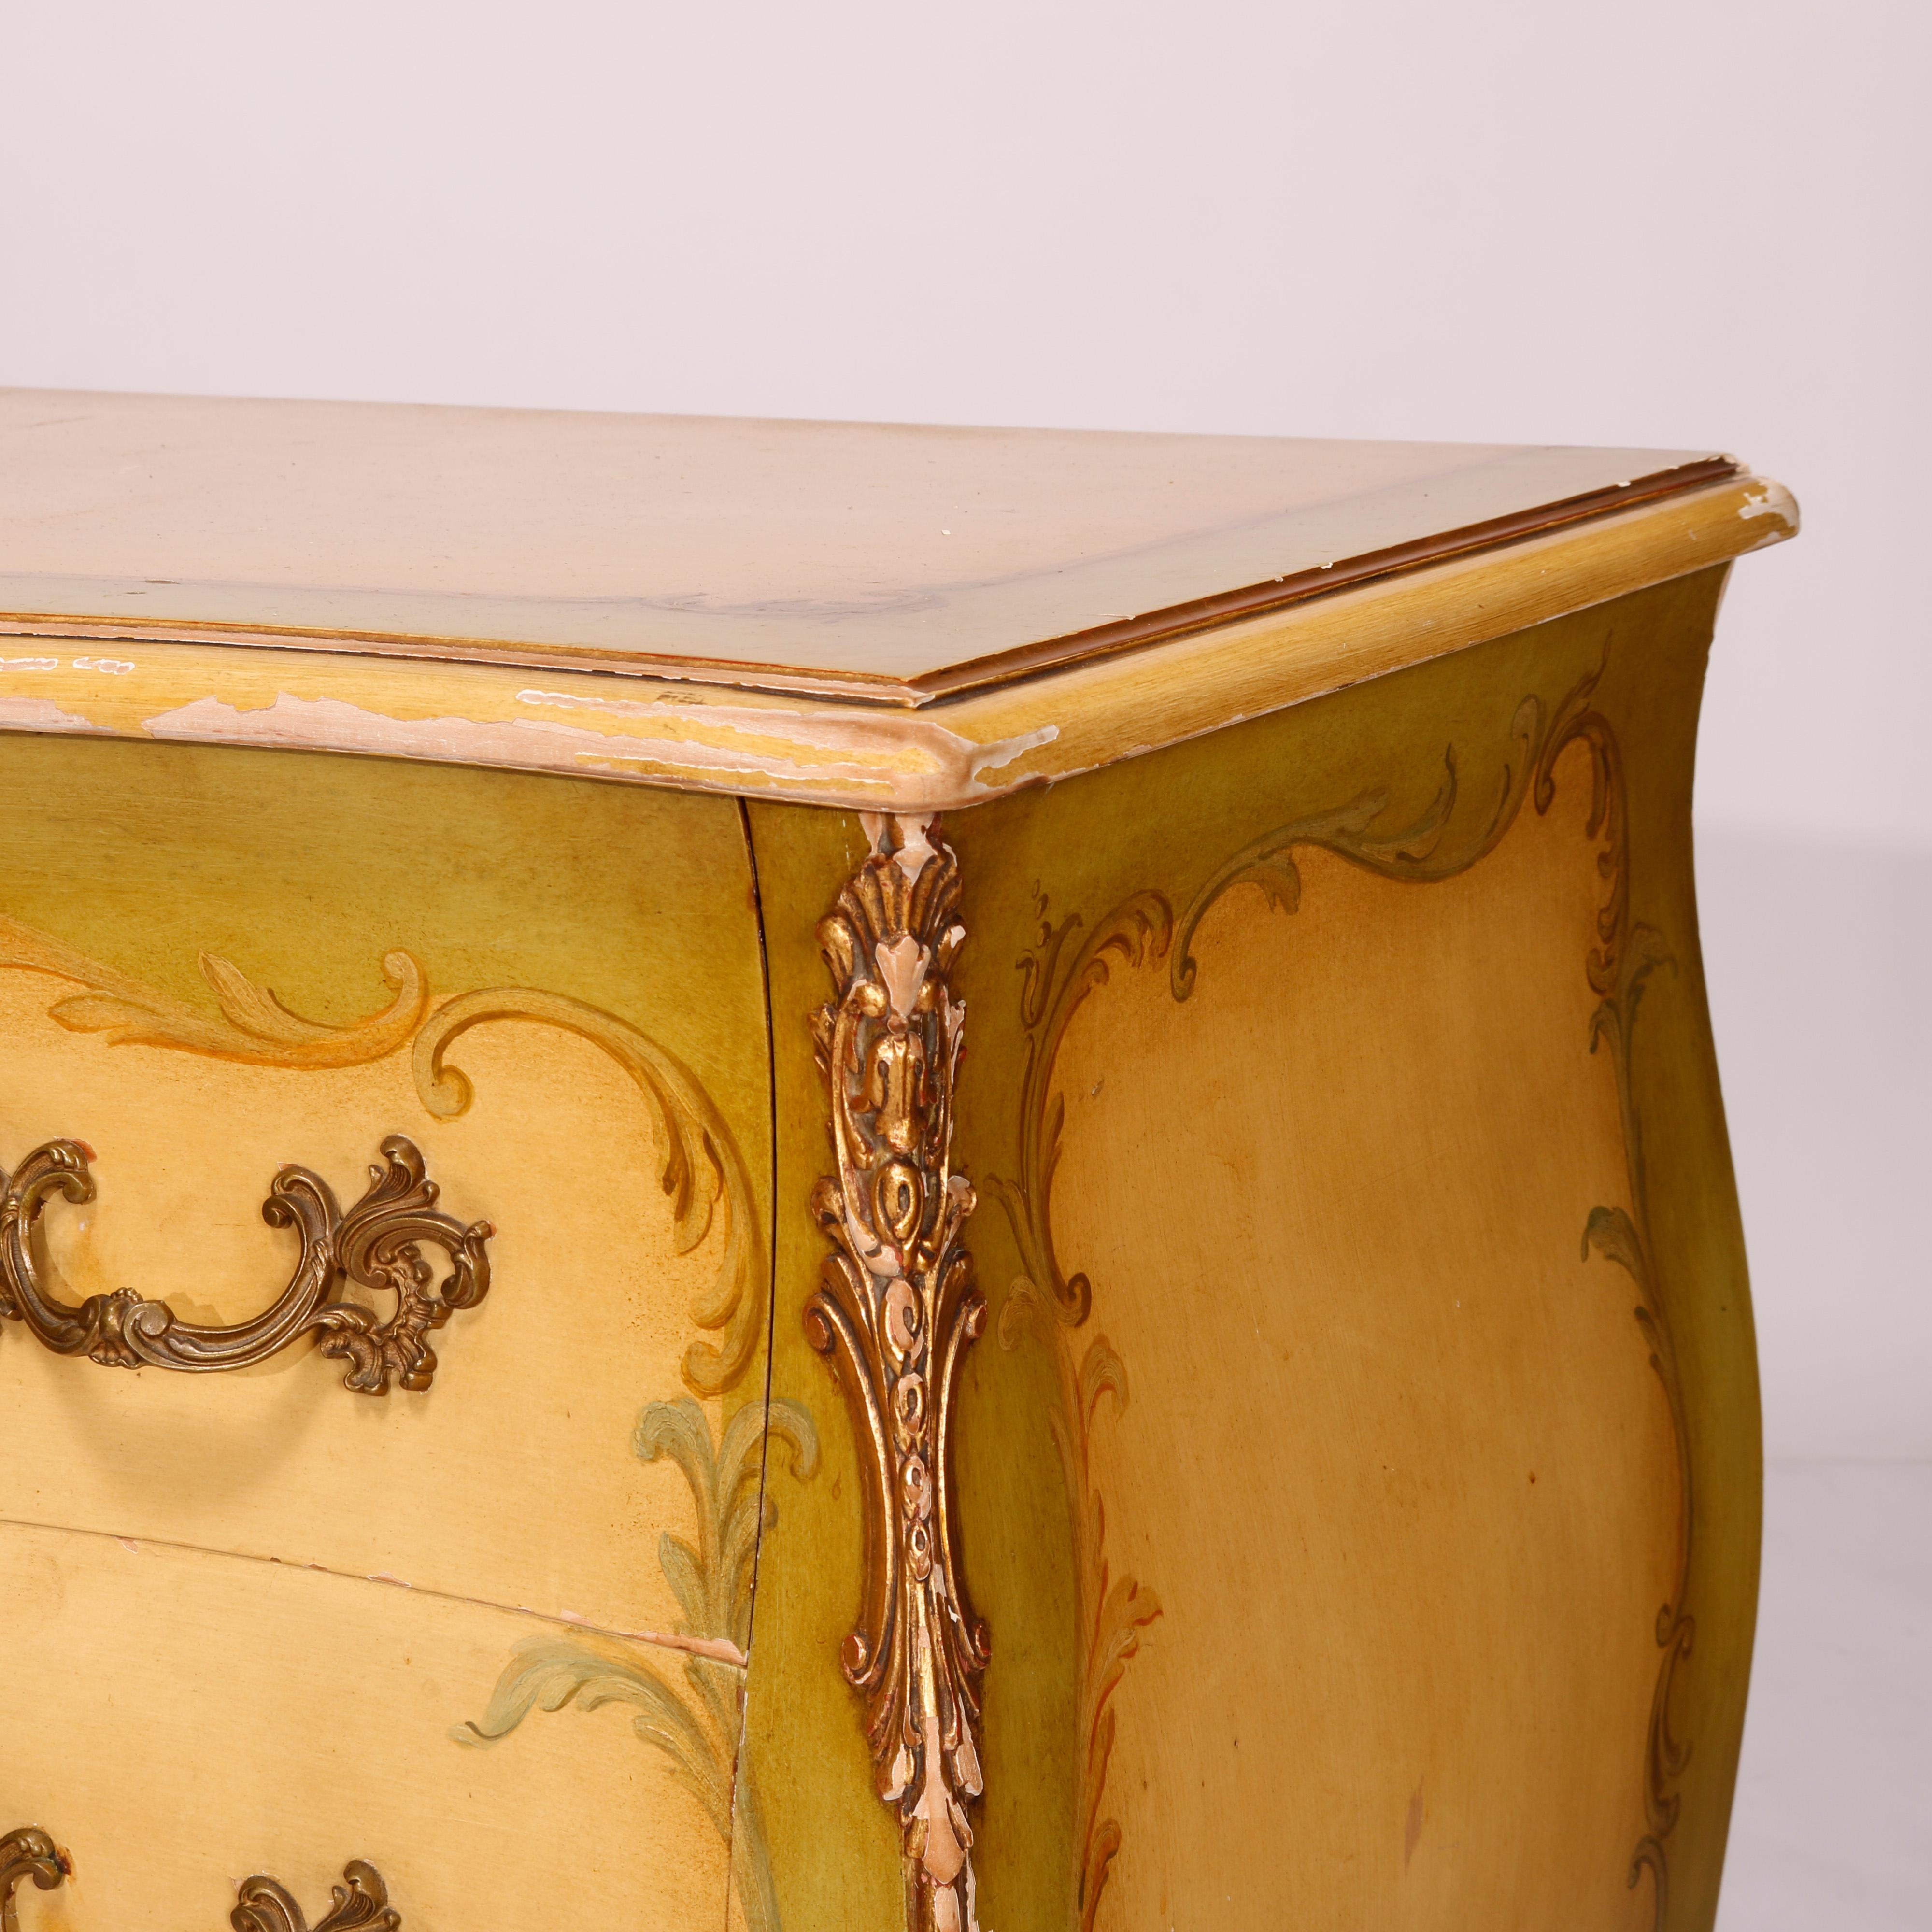 20th Century French Louis XV Style Widdicomb Painted & Gilt Bombe Chest 20th C